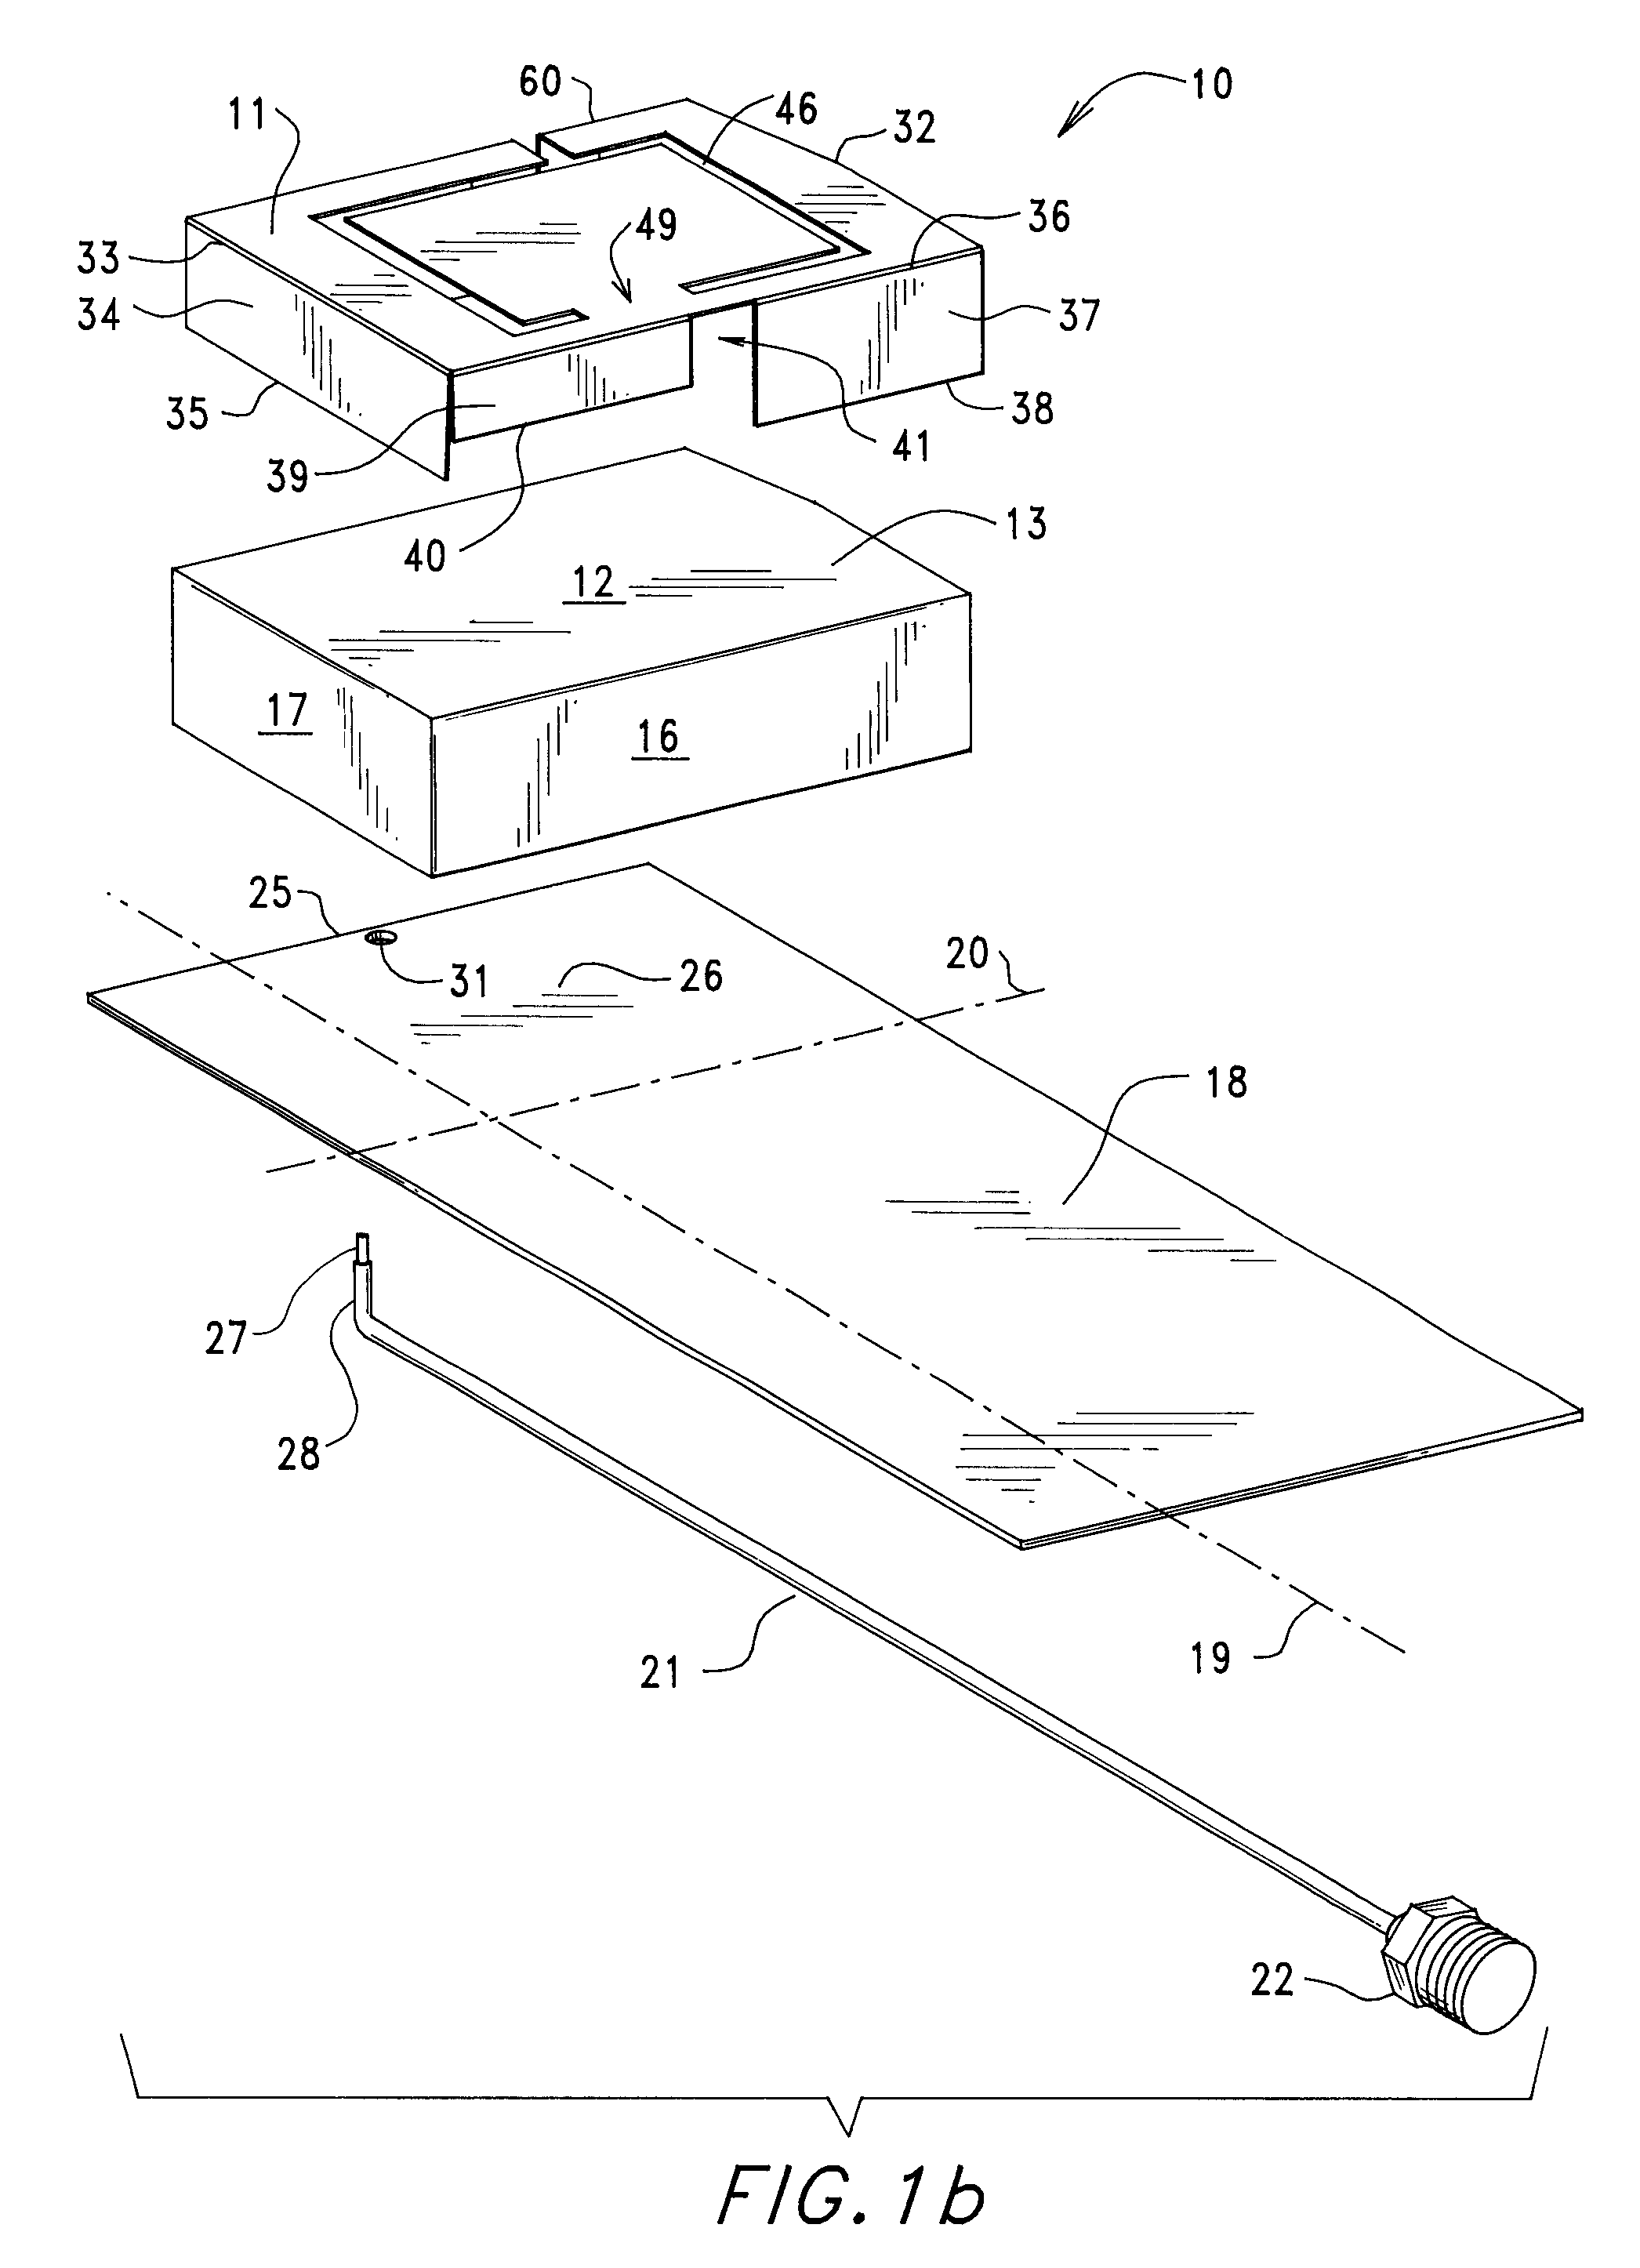 Planar Inverted-F-Antenna (PIFA) having a slotted radiating element providing global cellular and GPS-bluetooth frequency response